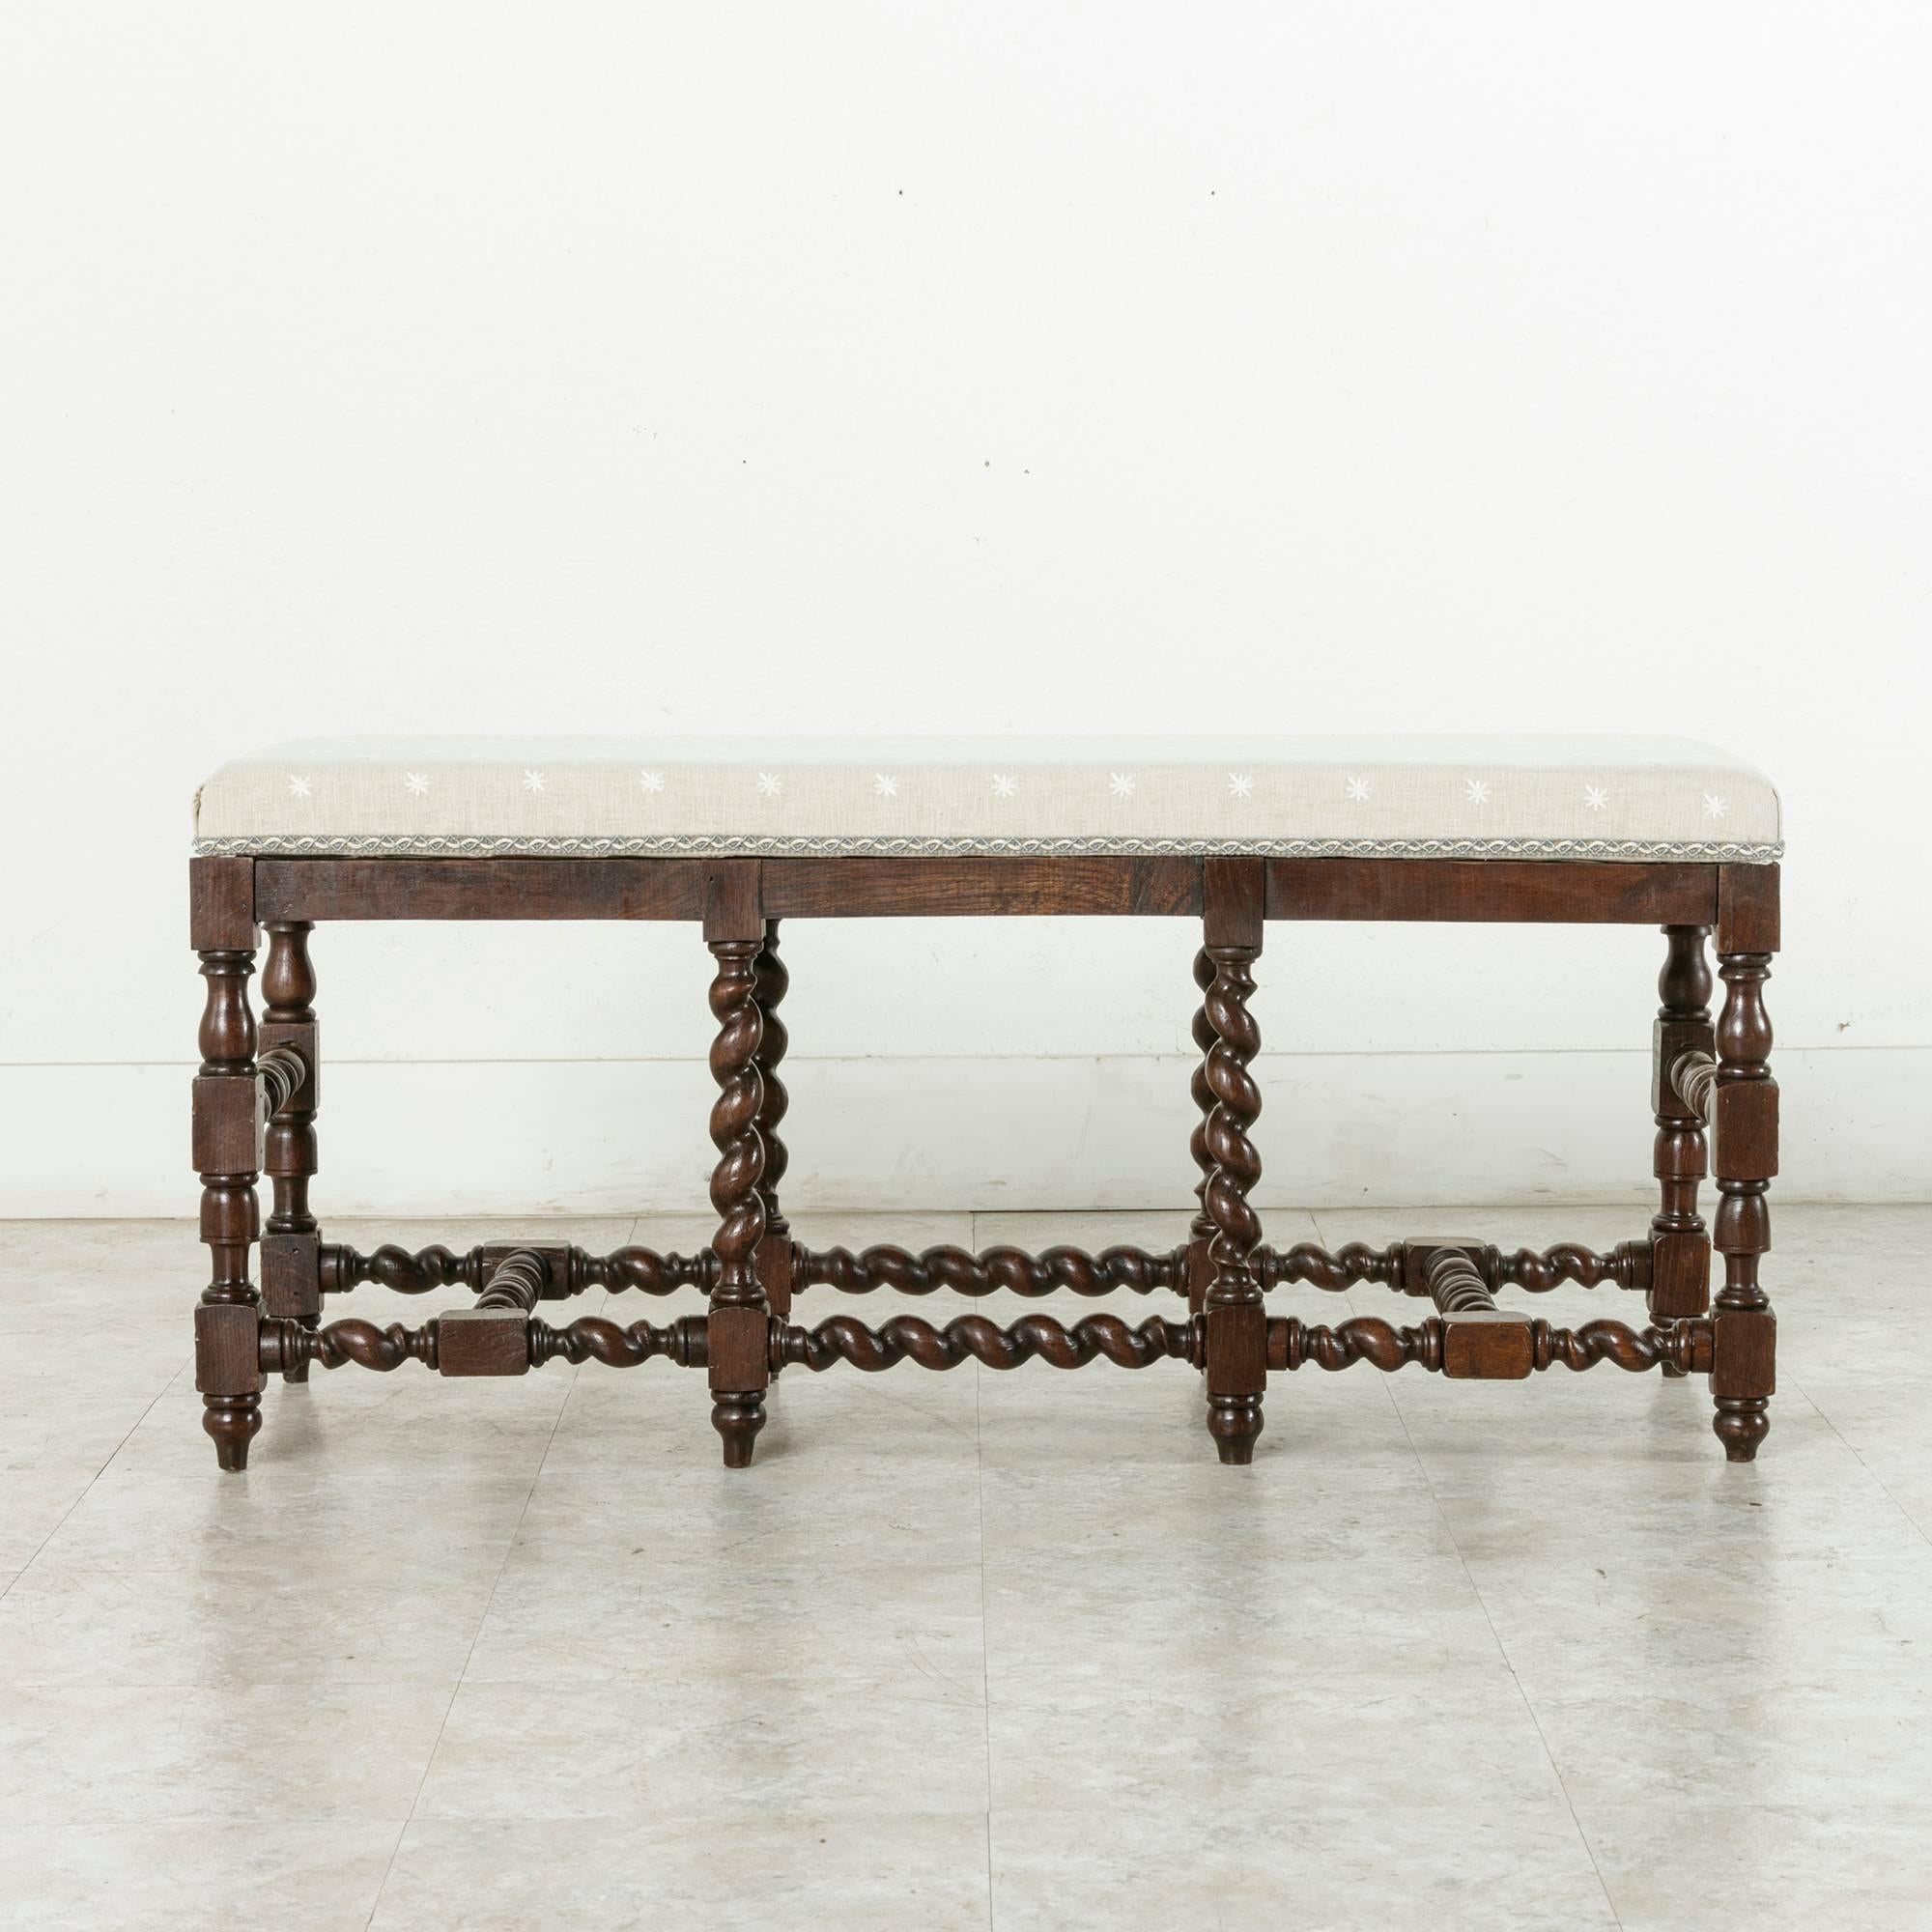 Upholstery Hand-Carved French Oak Benches with Barley Twist Legs and Stretchers, circa 1900